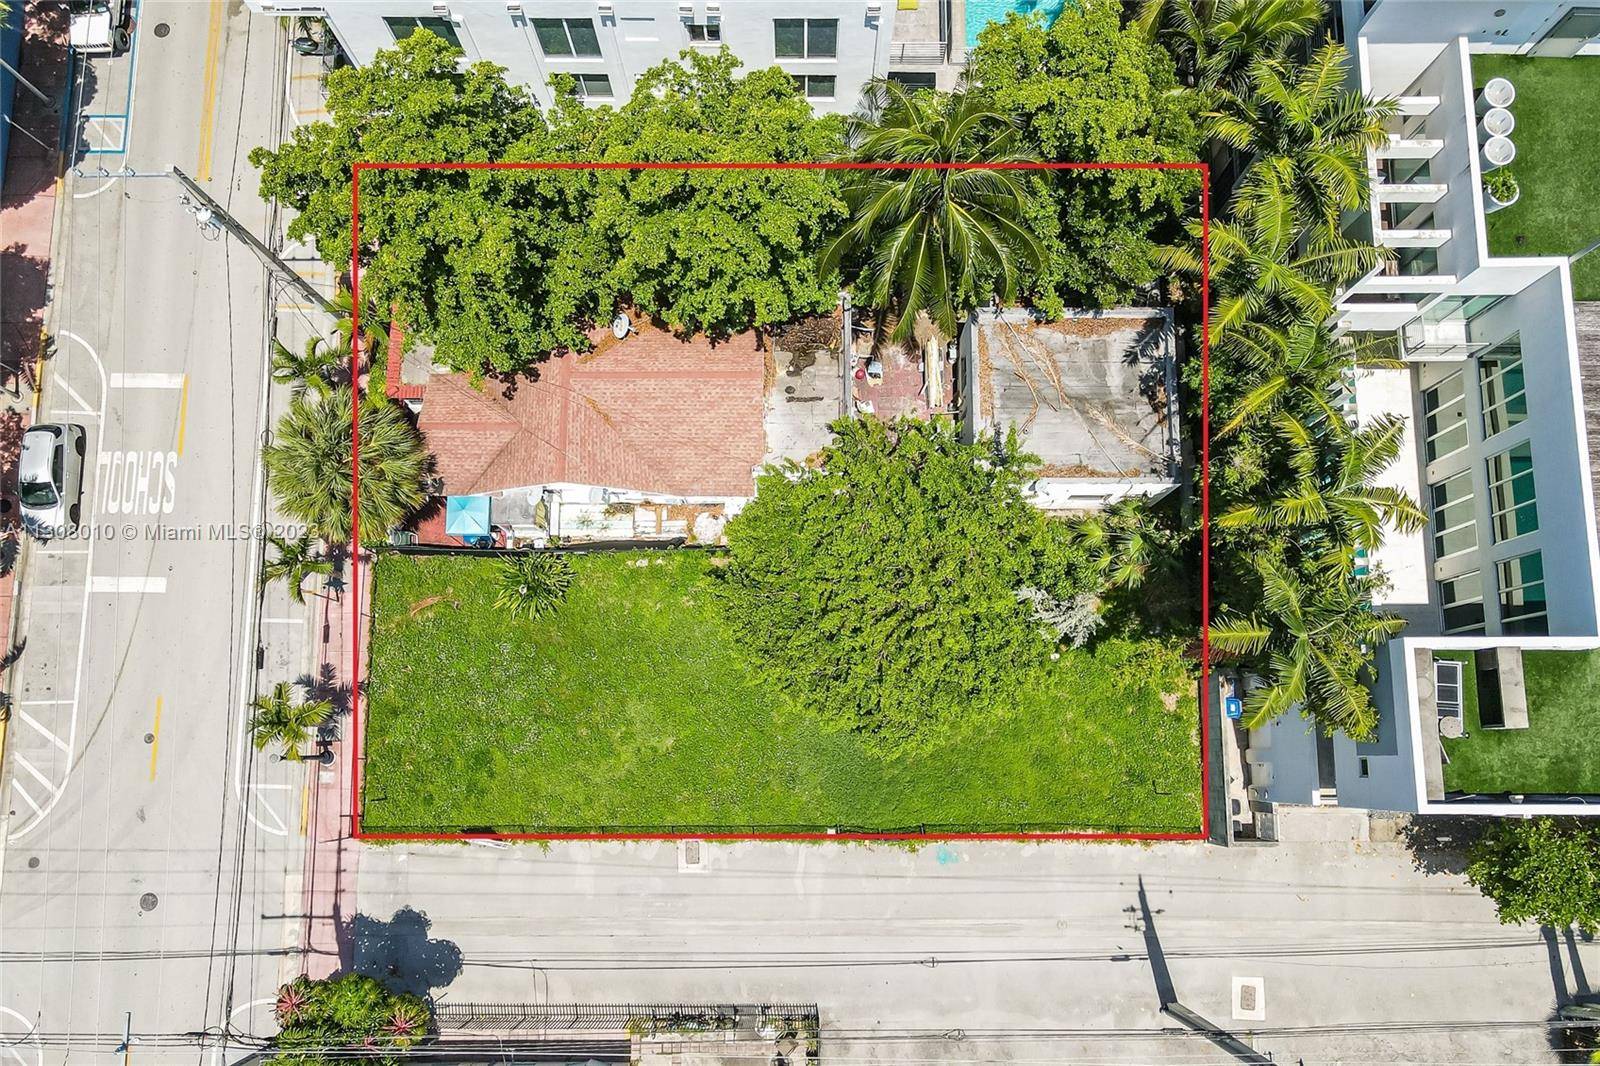 Very rare opportunity of find a double lot with alley access located in the desirable SoFi neighborhood South of 5th South Beach.